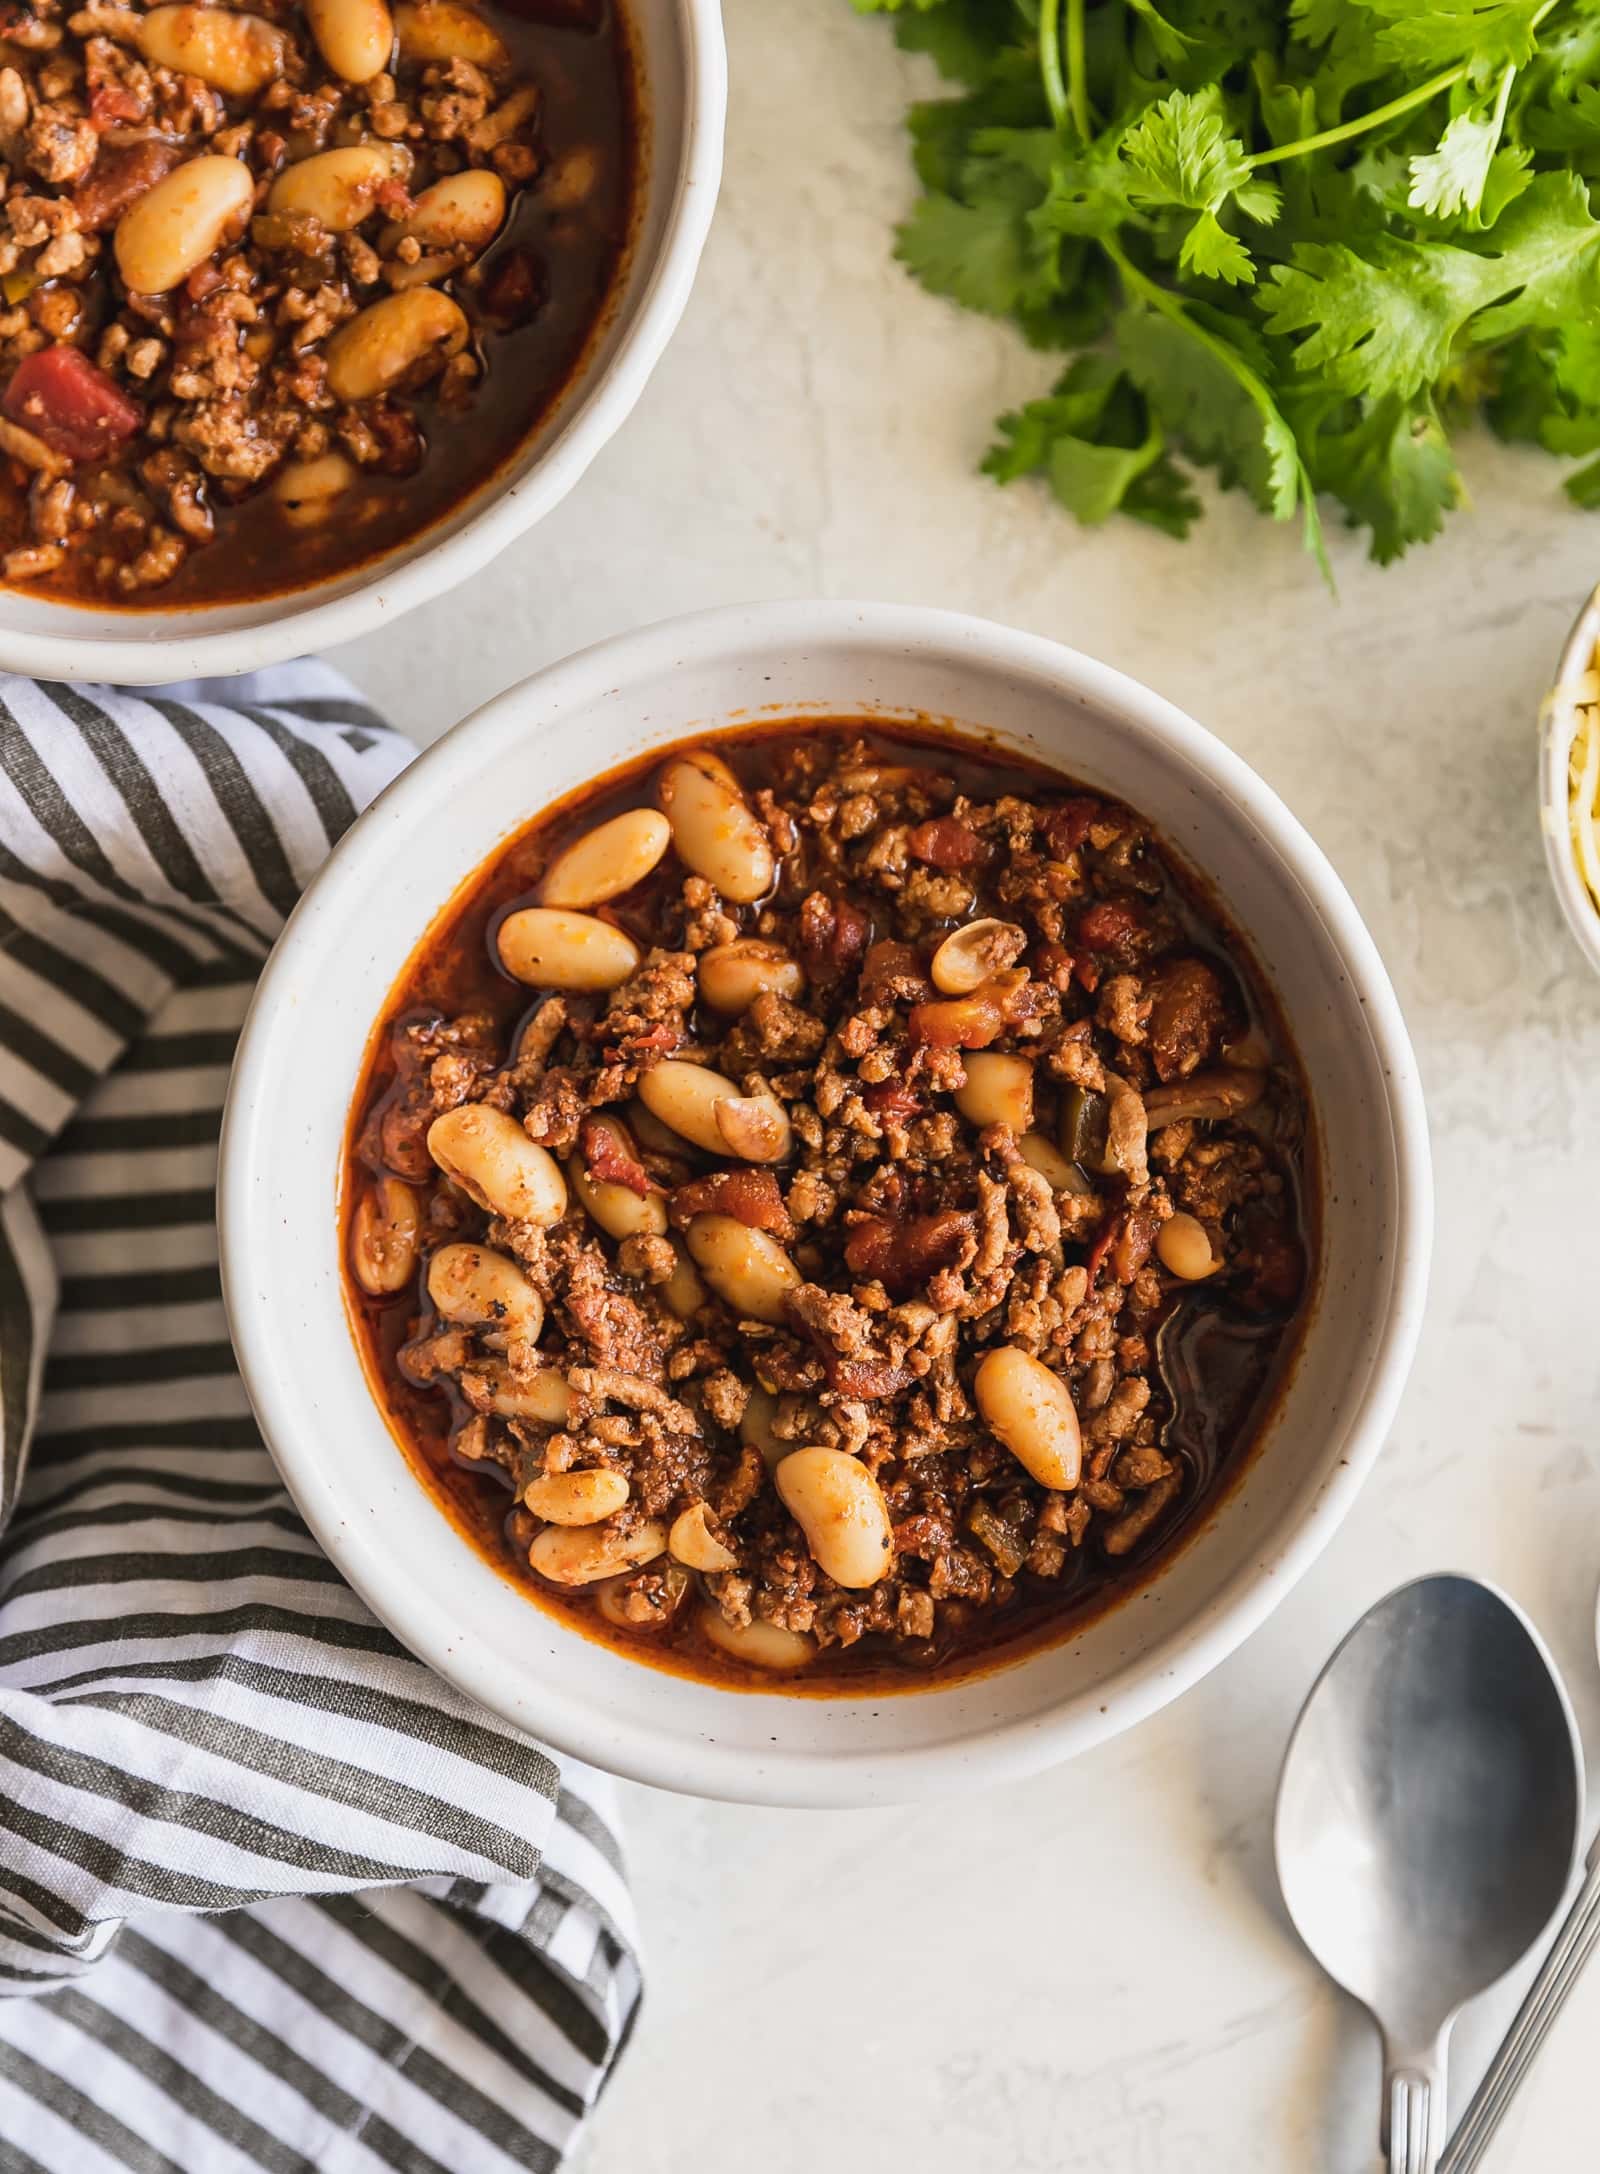 A hearty, comforting bowl of chili made with white kidney beans (cannellini), ground turkey, and Mexican chorizo. Ready in just 35 minutes!